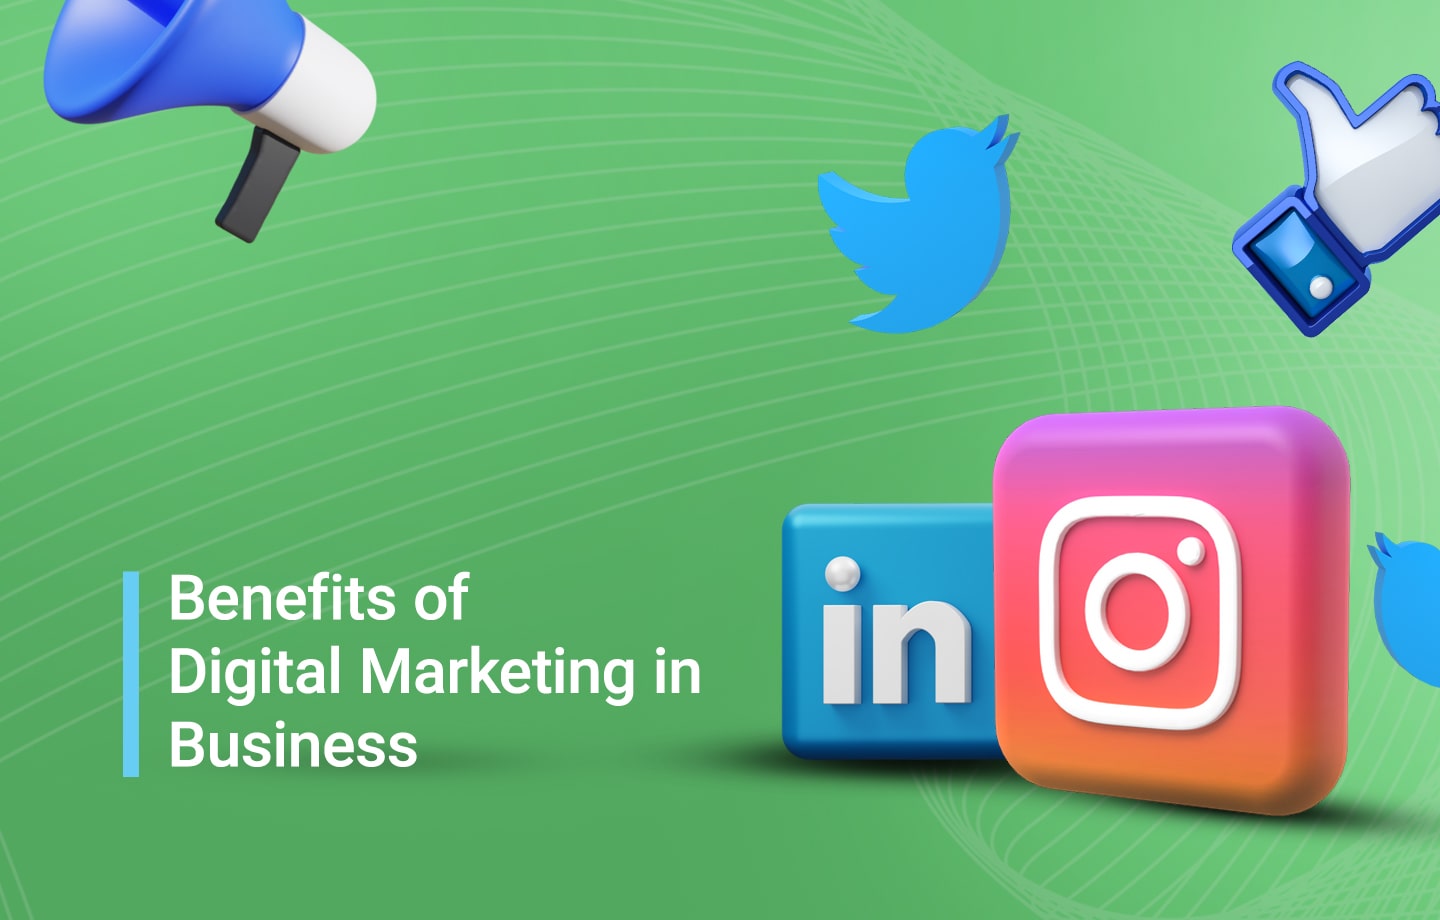 Benefits of Digital Marketing In Business: Global, Local and More